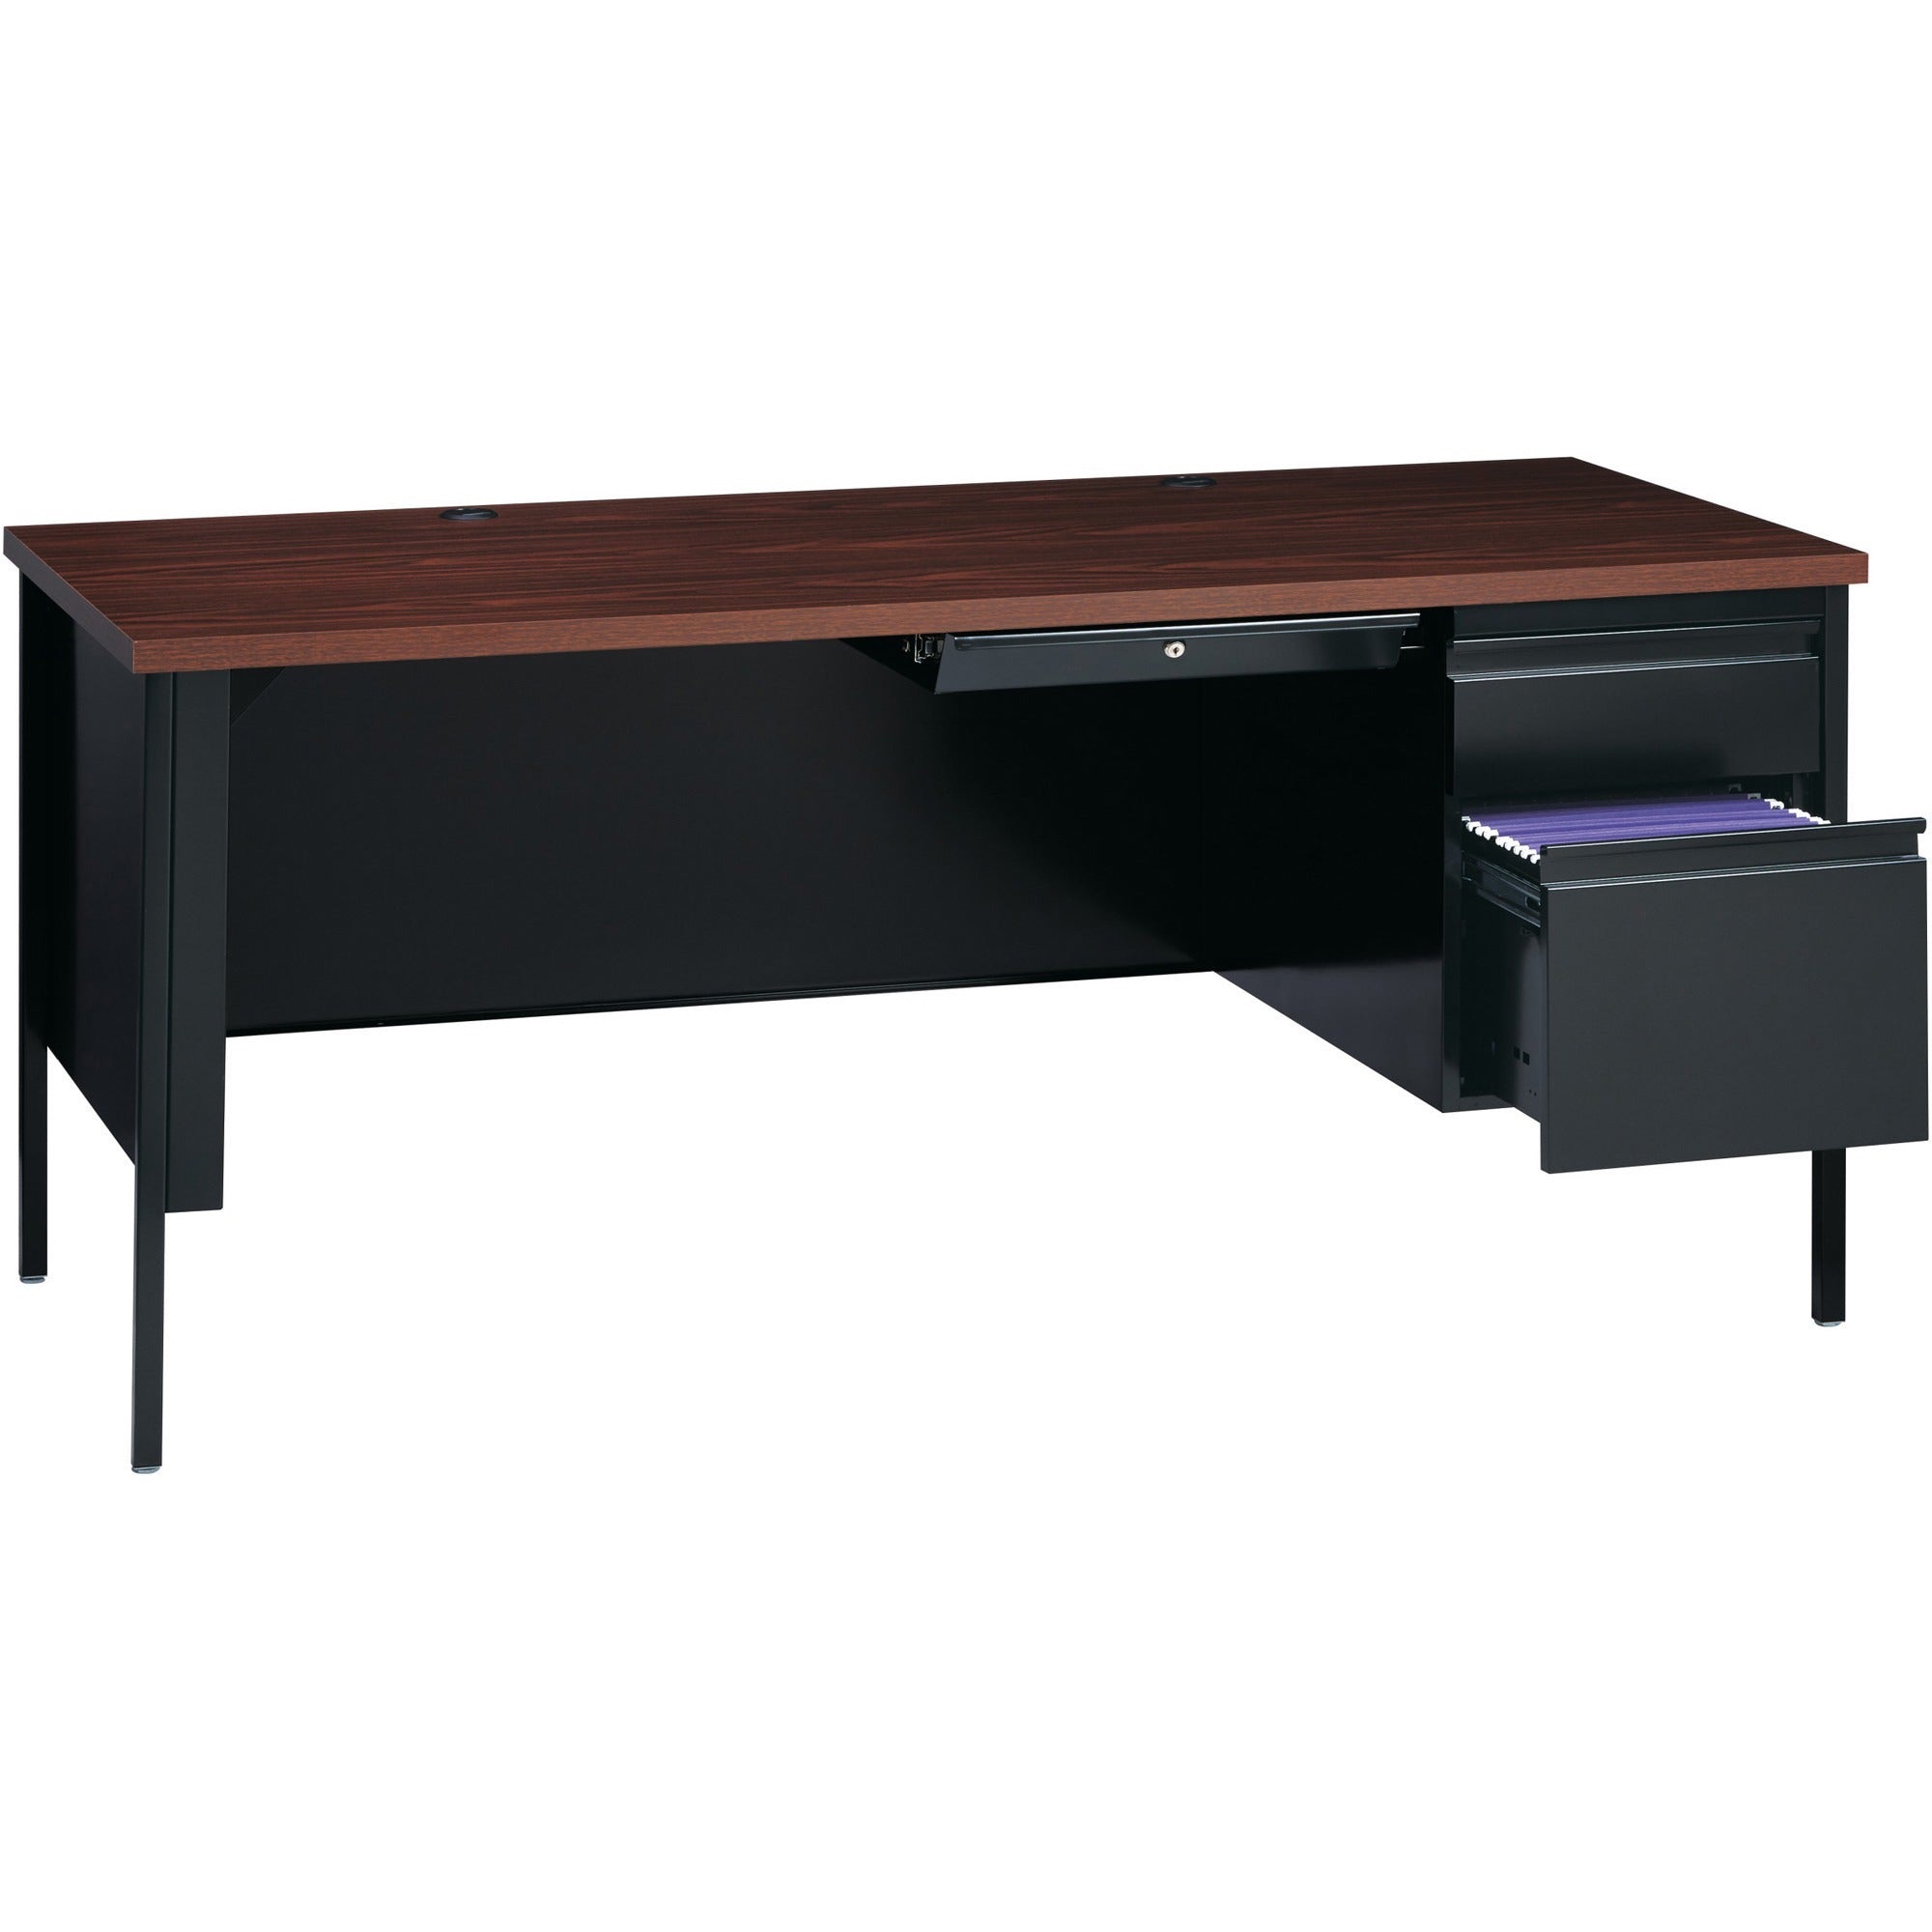 lorell-fortress-series-66-right-pedestal-desk-for-table-toplaminated-rectangle-walnut-top-30-table-top-length-x-66-table-top-width-x-113-table-top-thickness-2950-height-assembly-required-black-walnut-steel-1-each_llr66905 - 5